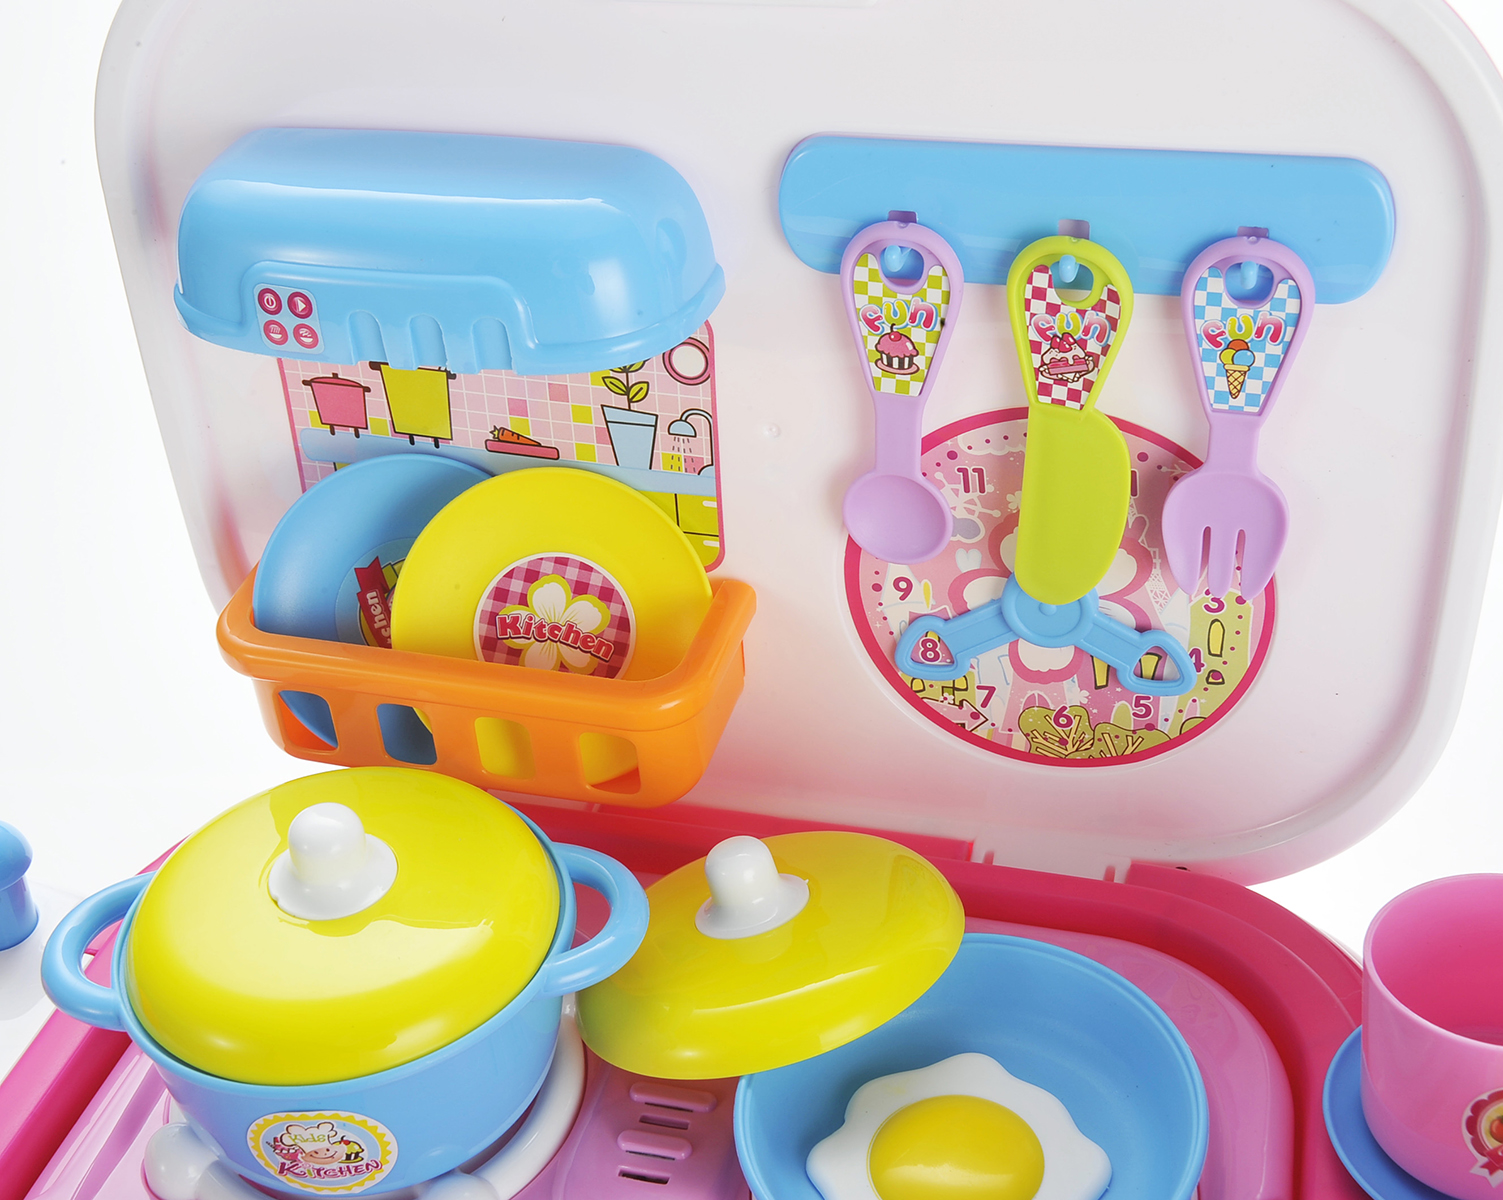 Kitchen Connection Portable Kids Kitchen Cooking Set Toy With Lights And Sounds, Folds Into Stepstool - image 3 of 8